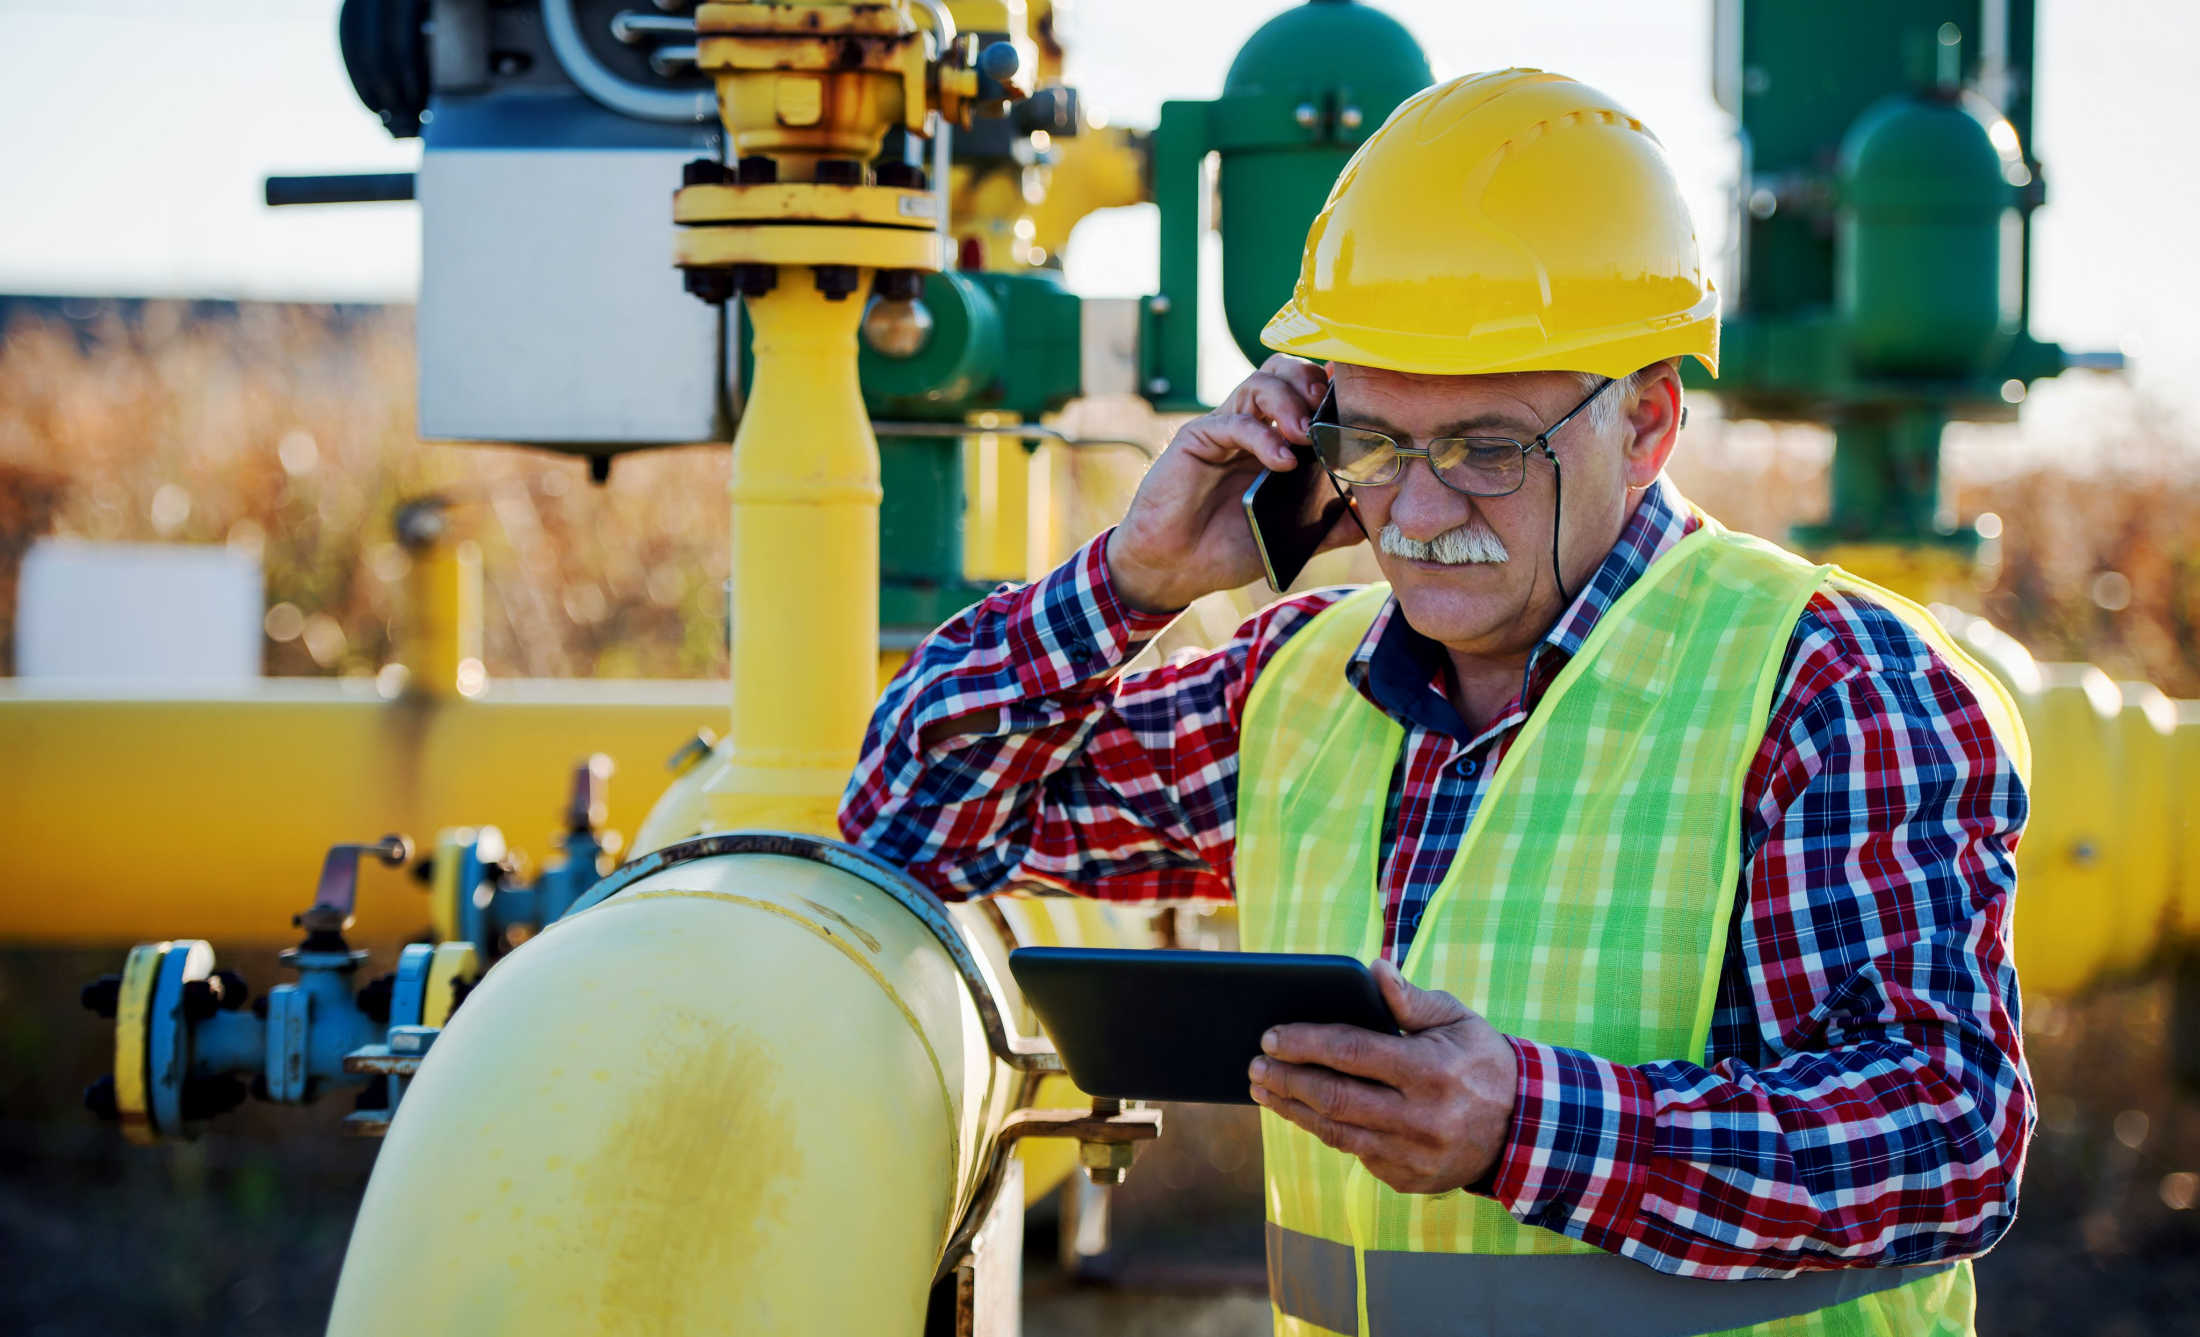 Site supervisor making a call on his mobile device while reviewing sensitive data on a tablet.